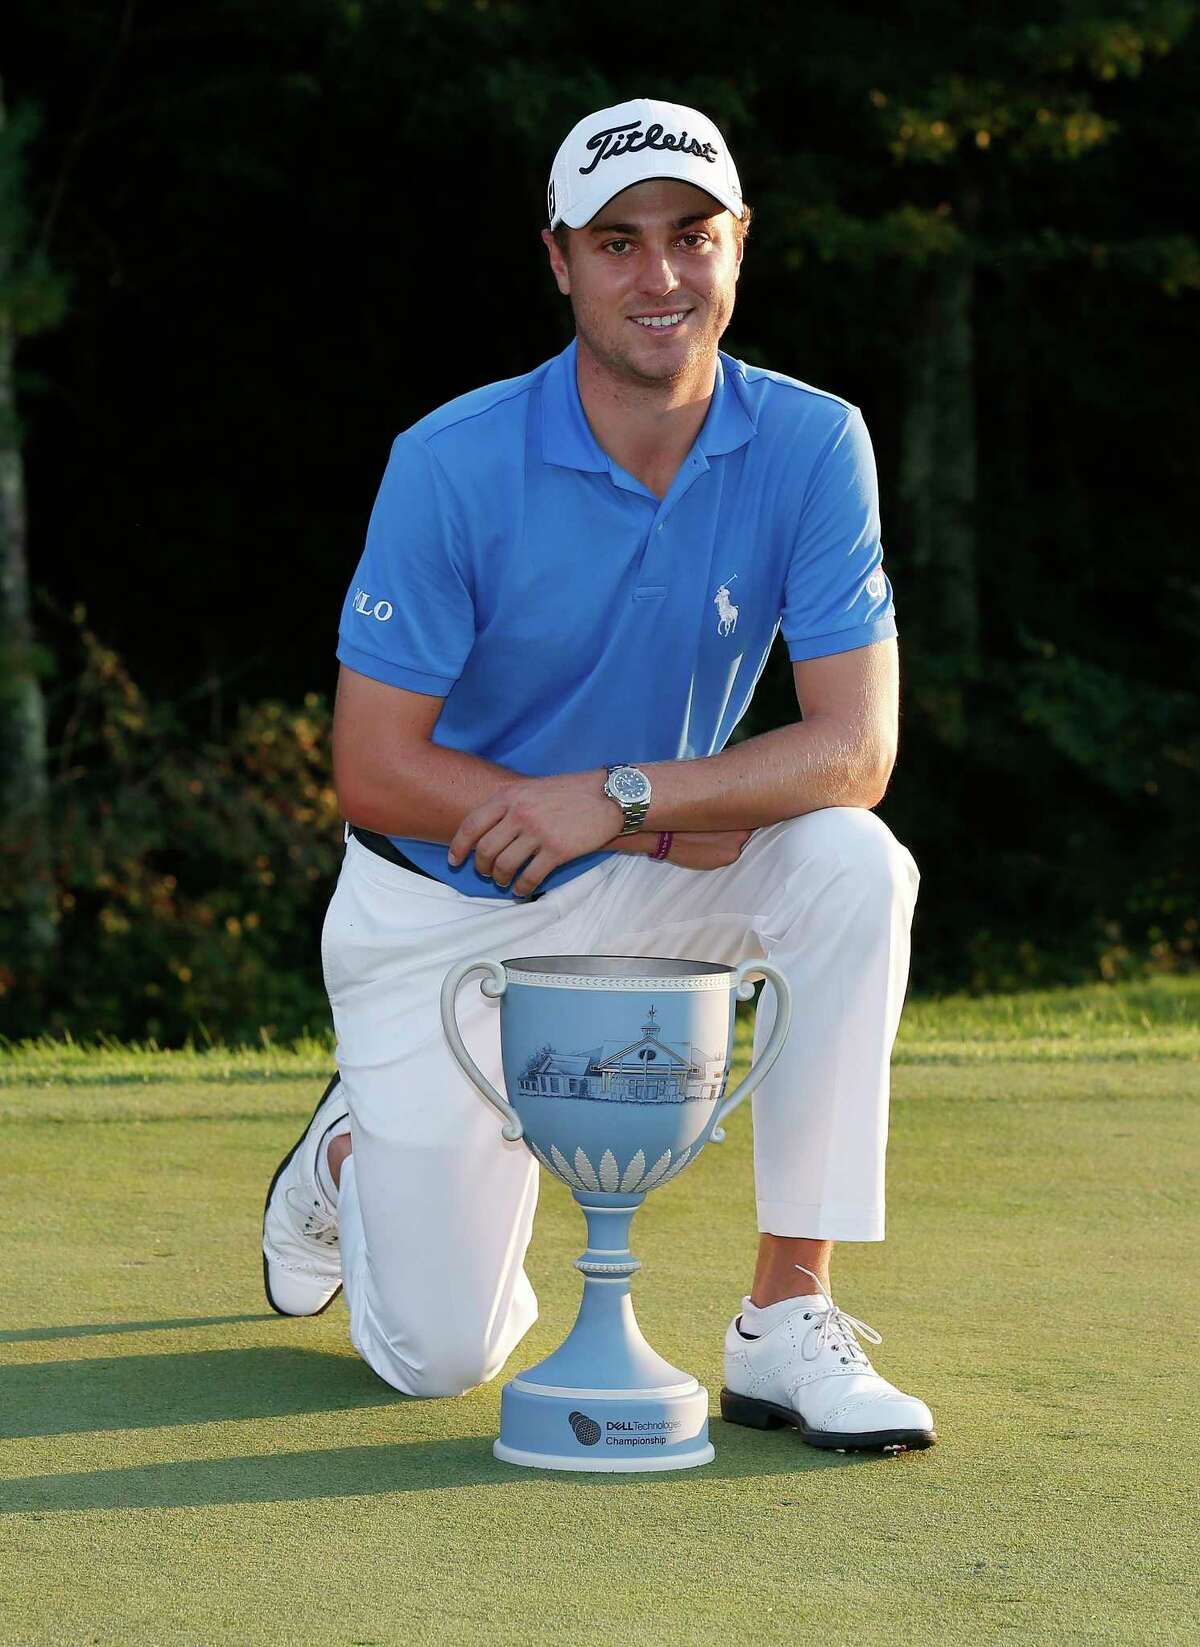 Justin Thomas poses with the trophy after winning the Dell Technologies Championship golf tournament at TPC Boston in Norton, Mass., Monday, Sept. 4, 2017. (AP Photo/Michael Dwyer)